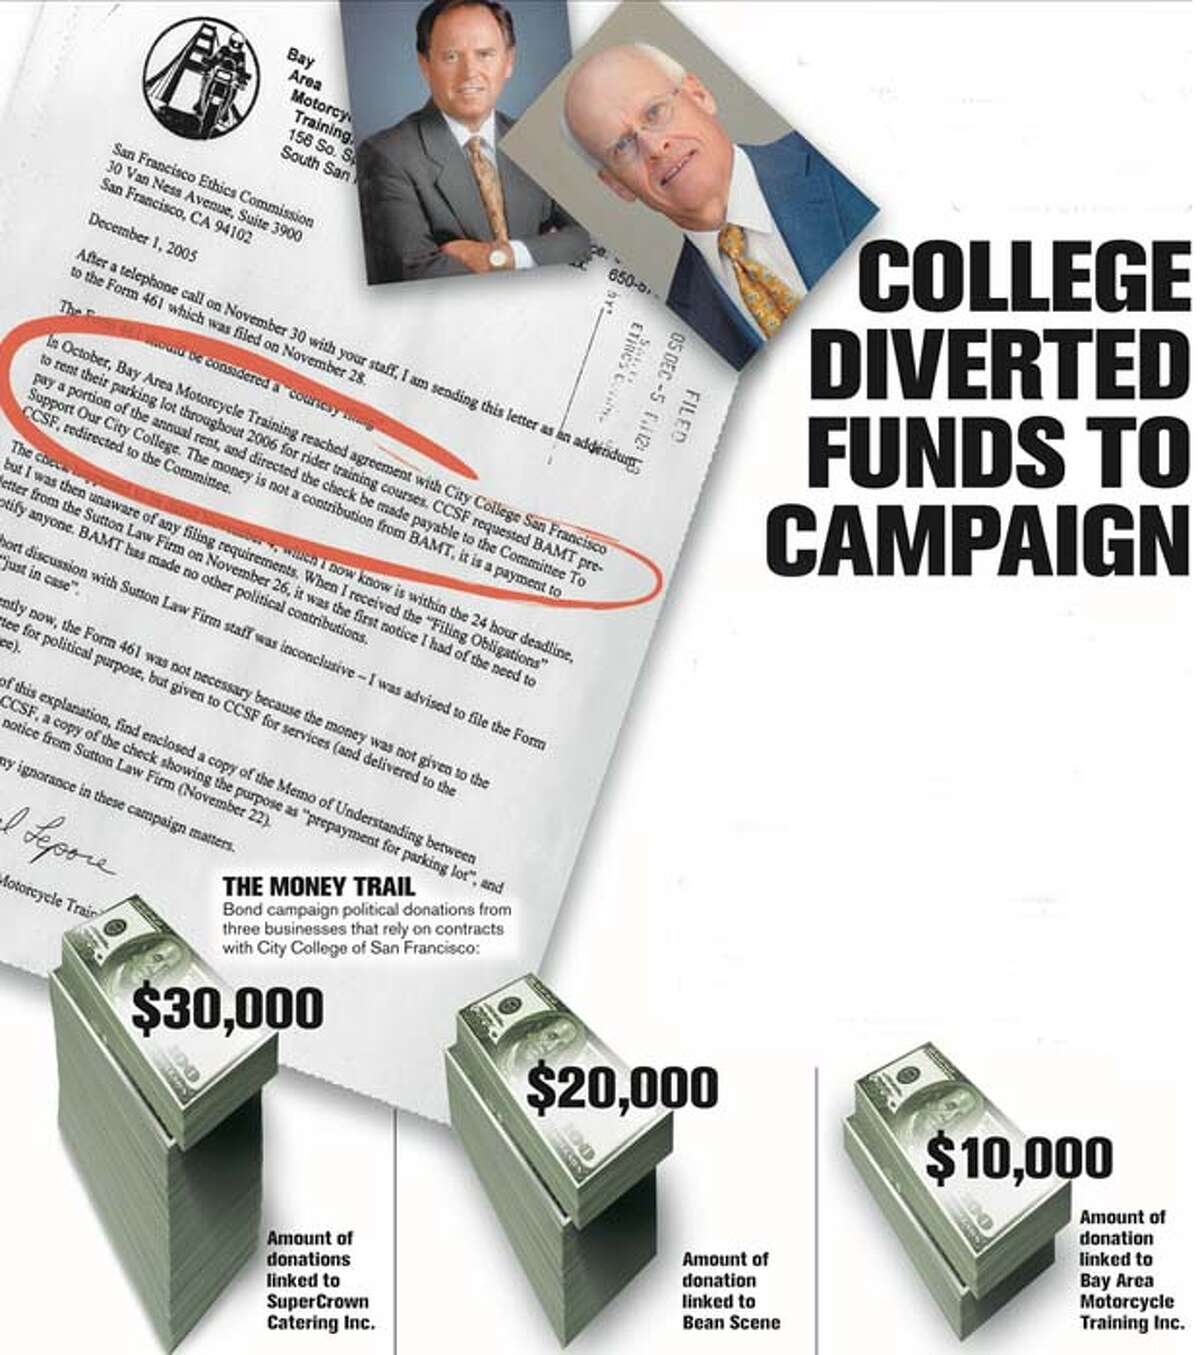 Main players: James Blomquist, above right, assistant vice chancellor, said a $10,000 payment to a bond measure committee -- the subject of the letter at left to city ethics officials -- was his idea. Chancellor Philip Day, above left, asked for it to be refunded. Chronicle Graphic